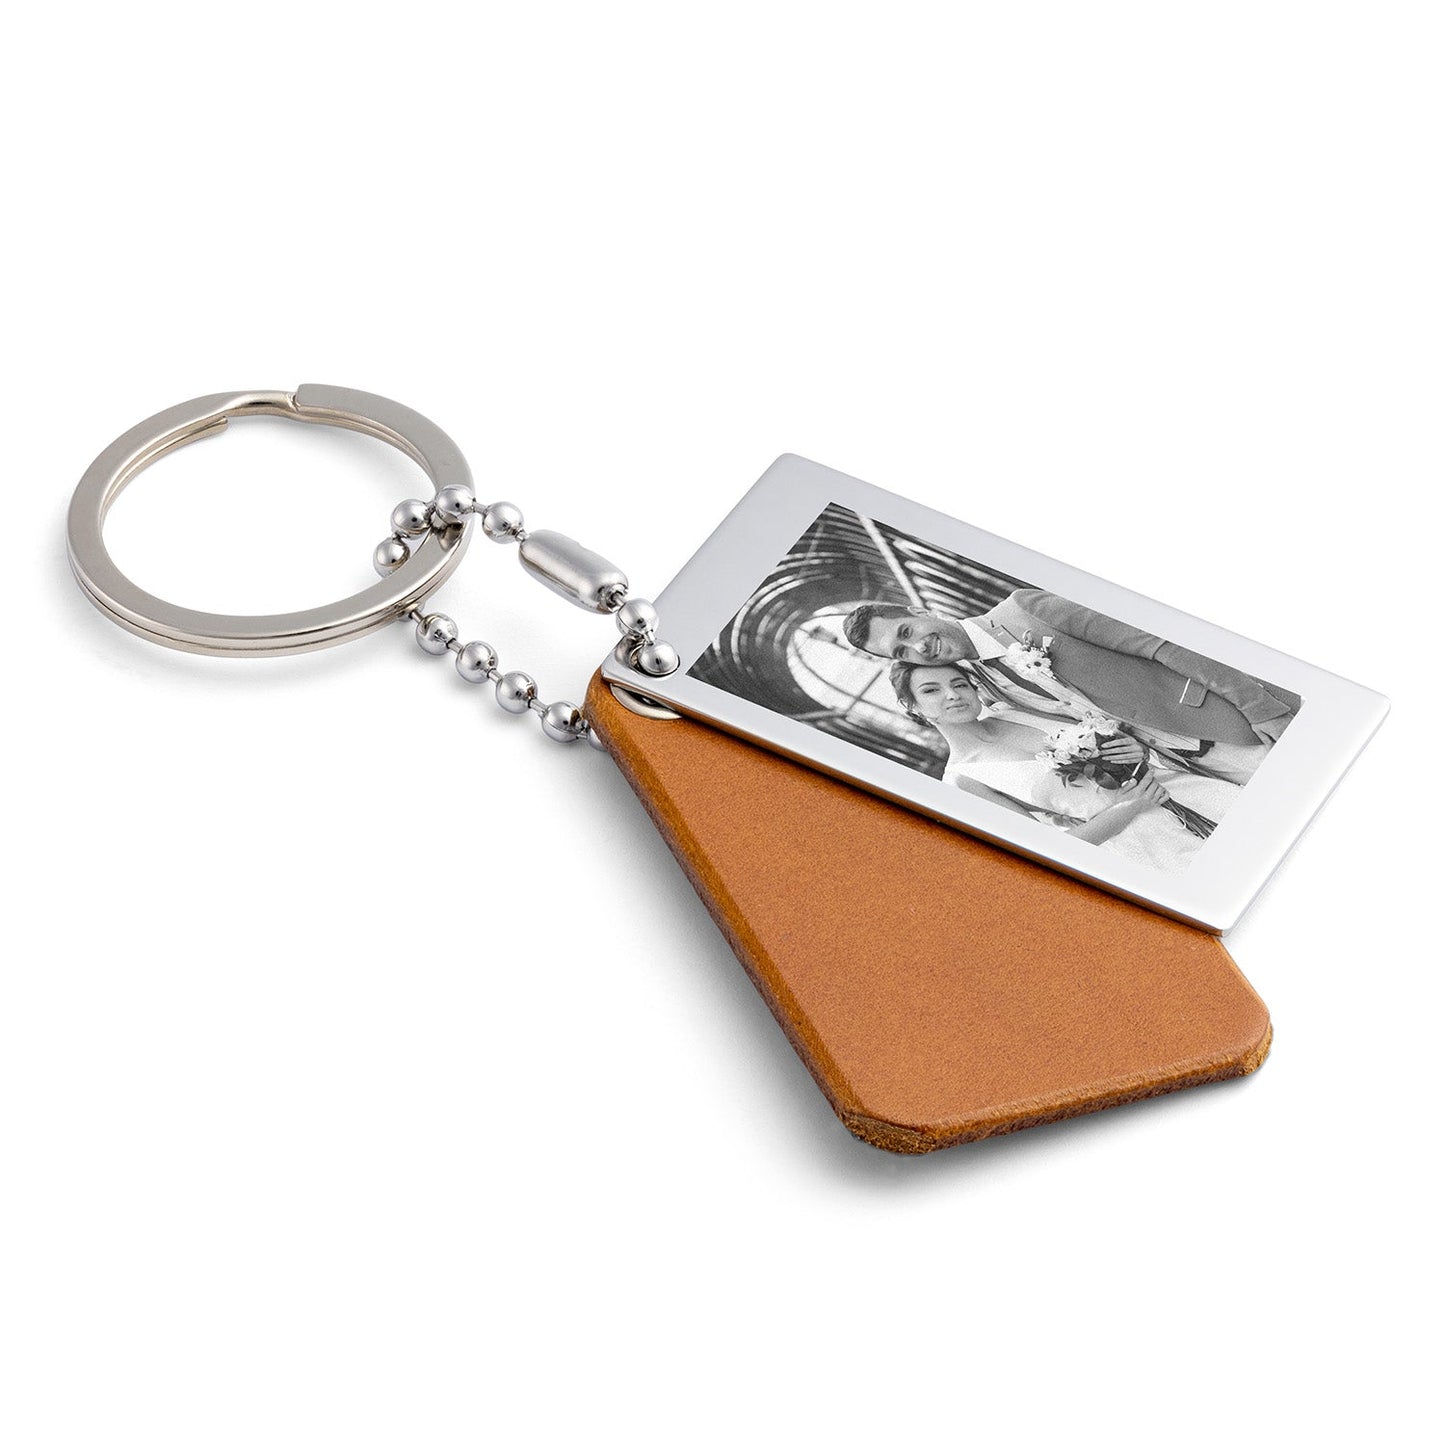 Personalised Photo Engraved Keyring in Cognac Leather - seQua.Shop